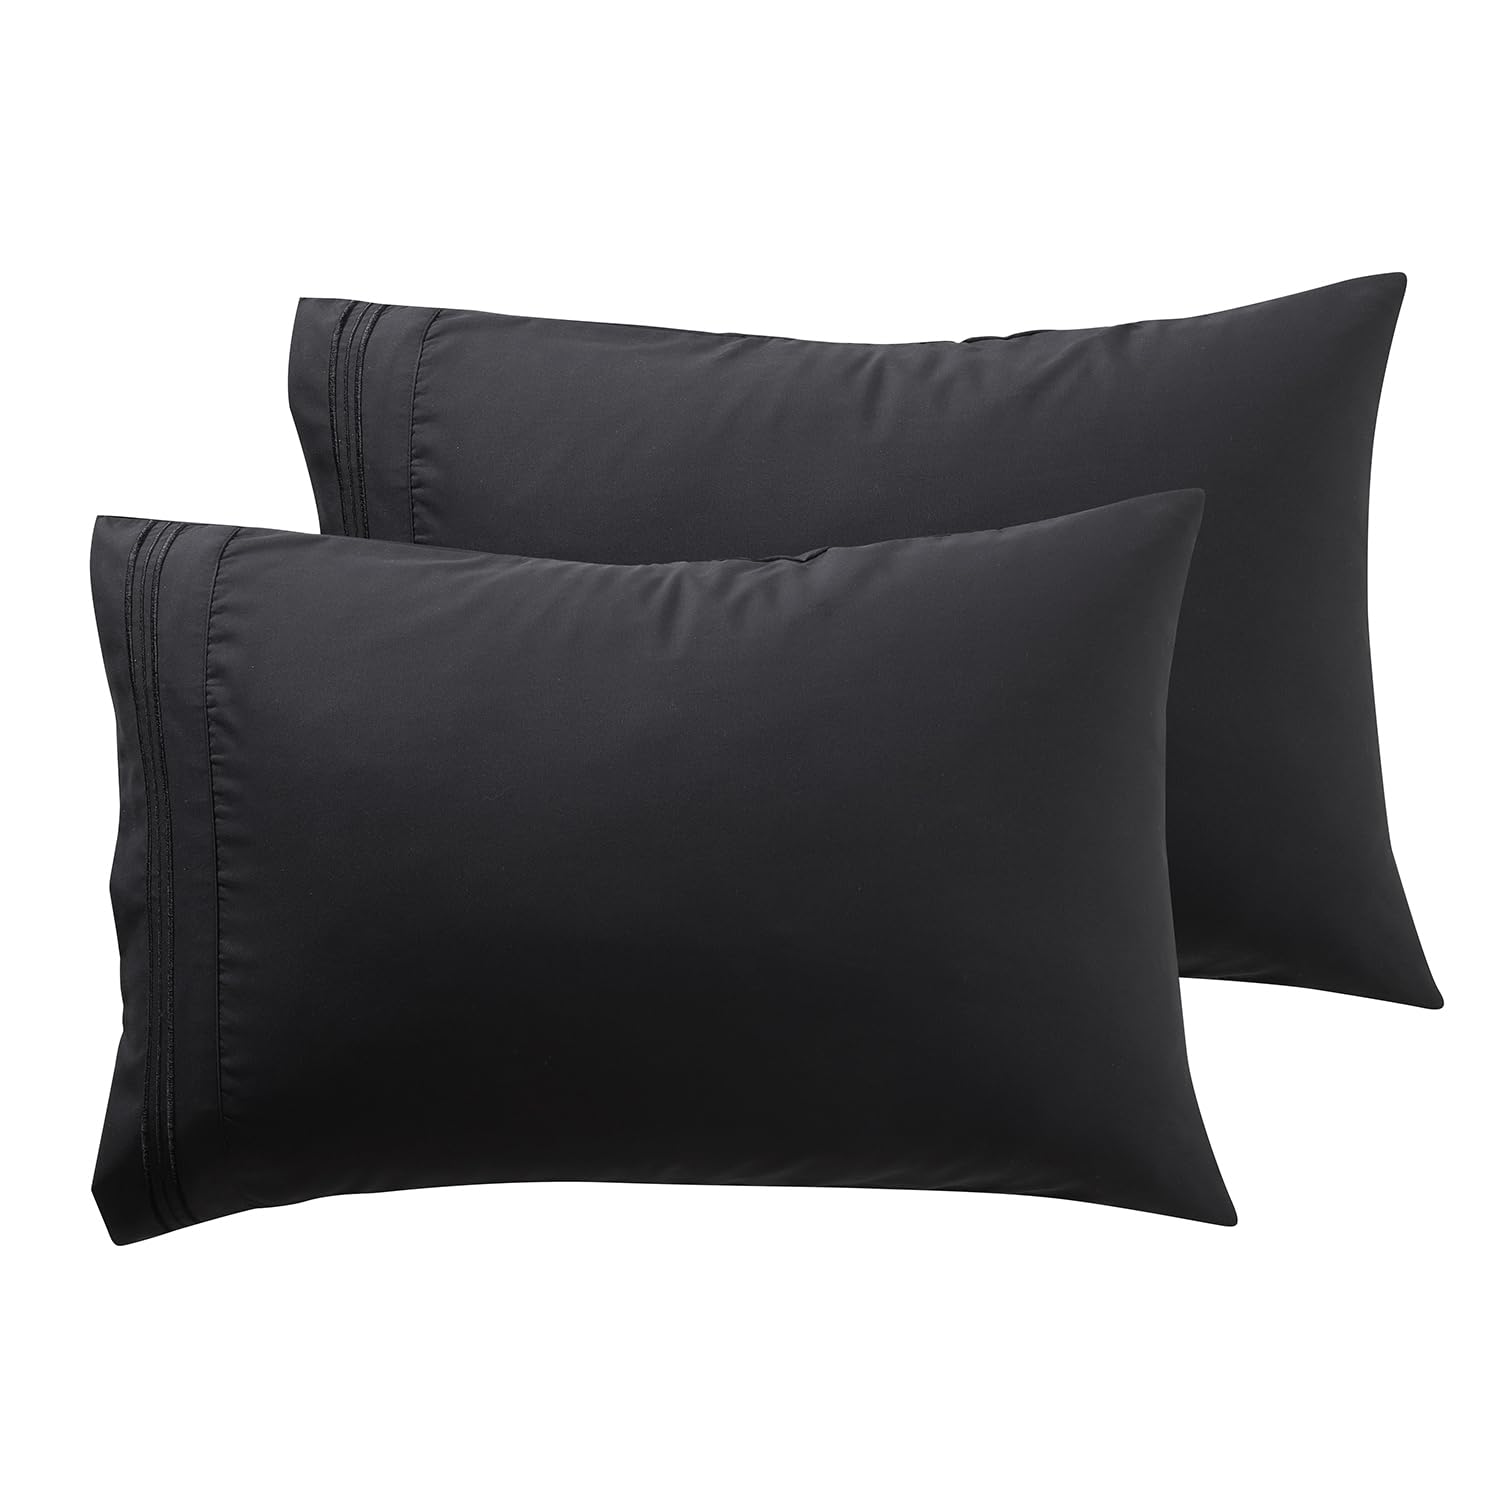 Book Cover Nestl Bedding Soft Pillow Case Set of 2 - Double Brushed Microfiber Hypoallergenic Pillow Covers - 1800 Series Premium Bed Pillow Cases, Standard/Queen - Black